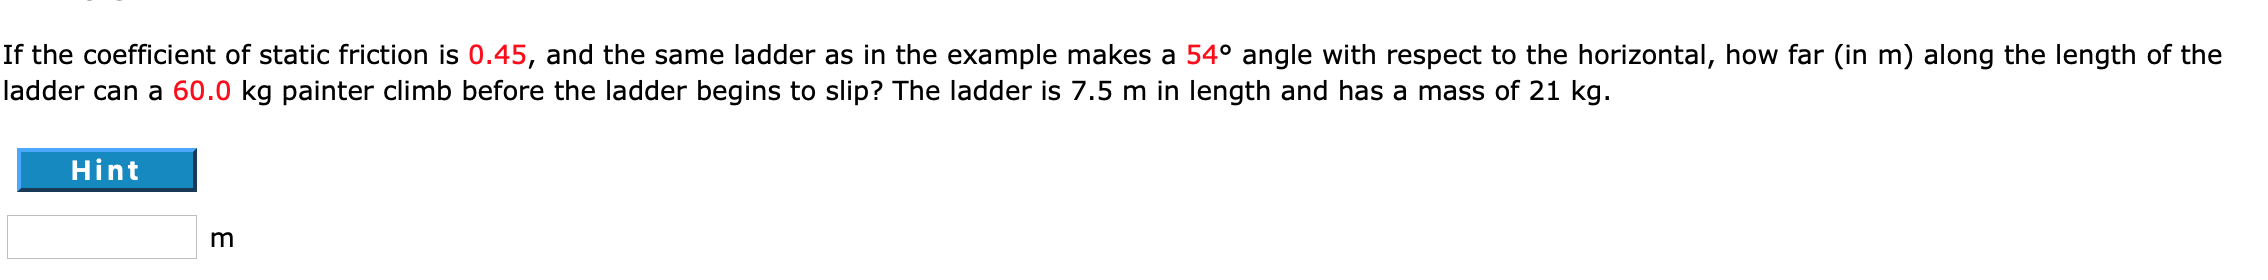 If the coefficient of static friction is 0.45, and the same ladder as in the example makes a 54° angle with respect to the horizontal, how far (in m) along the length of the
ladder can a 60.0 kg painter climb before the ladder begins to slip? The ladder is 7.5 m in length and has a mass of 21 kg.
Hint
